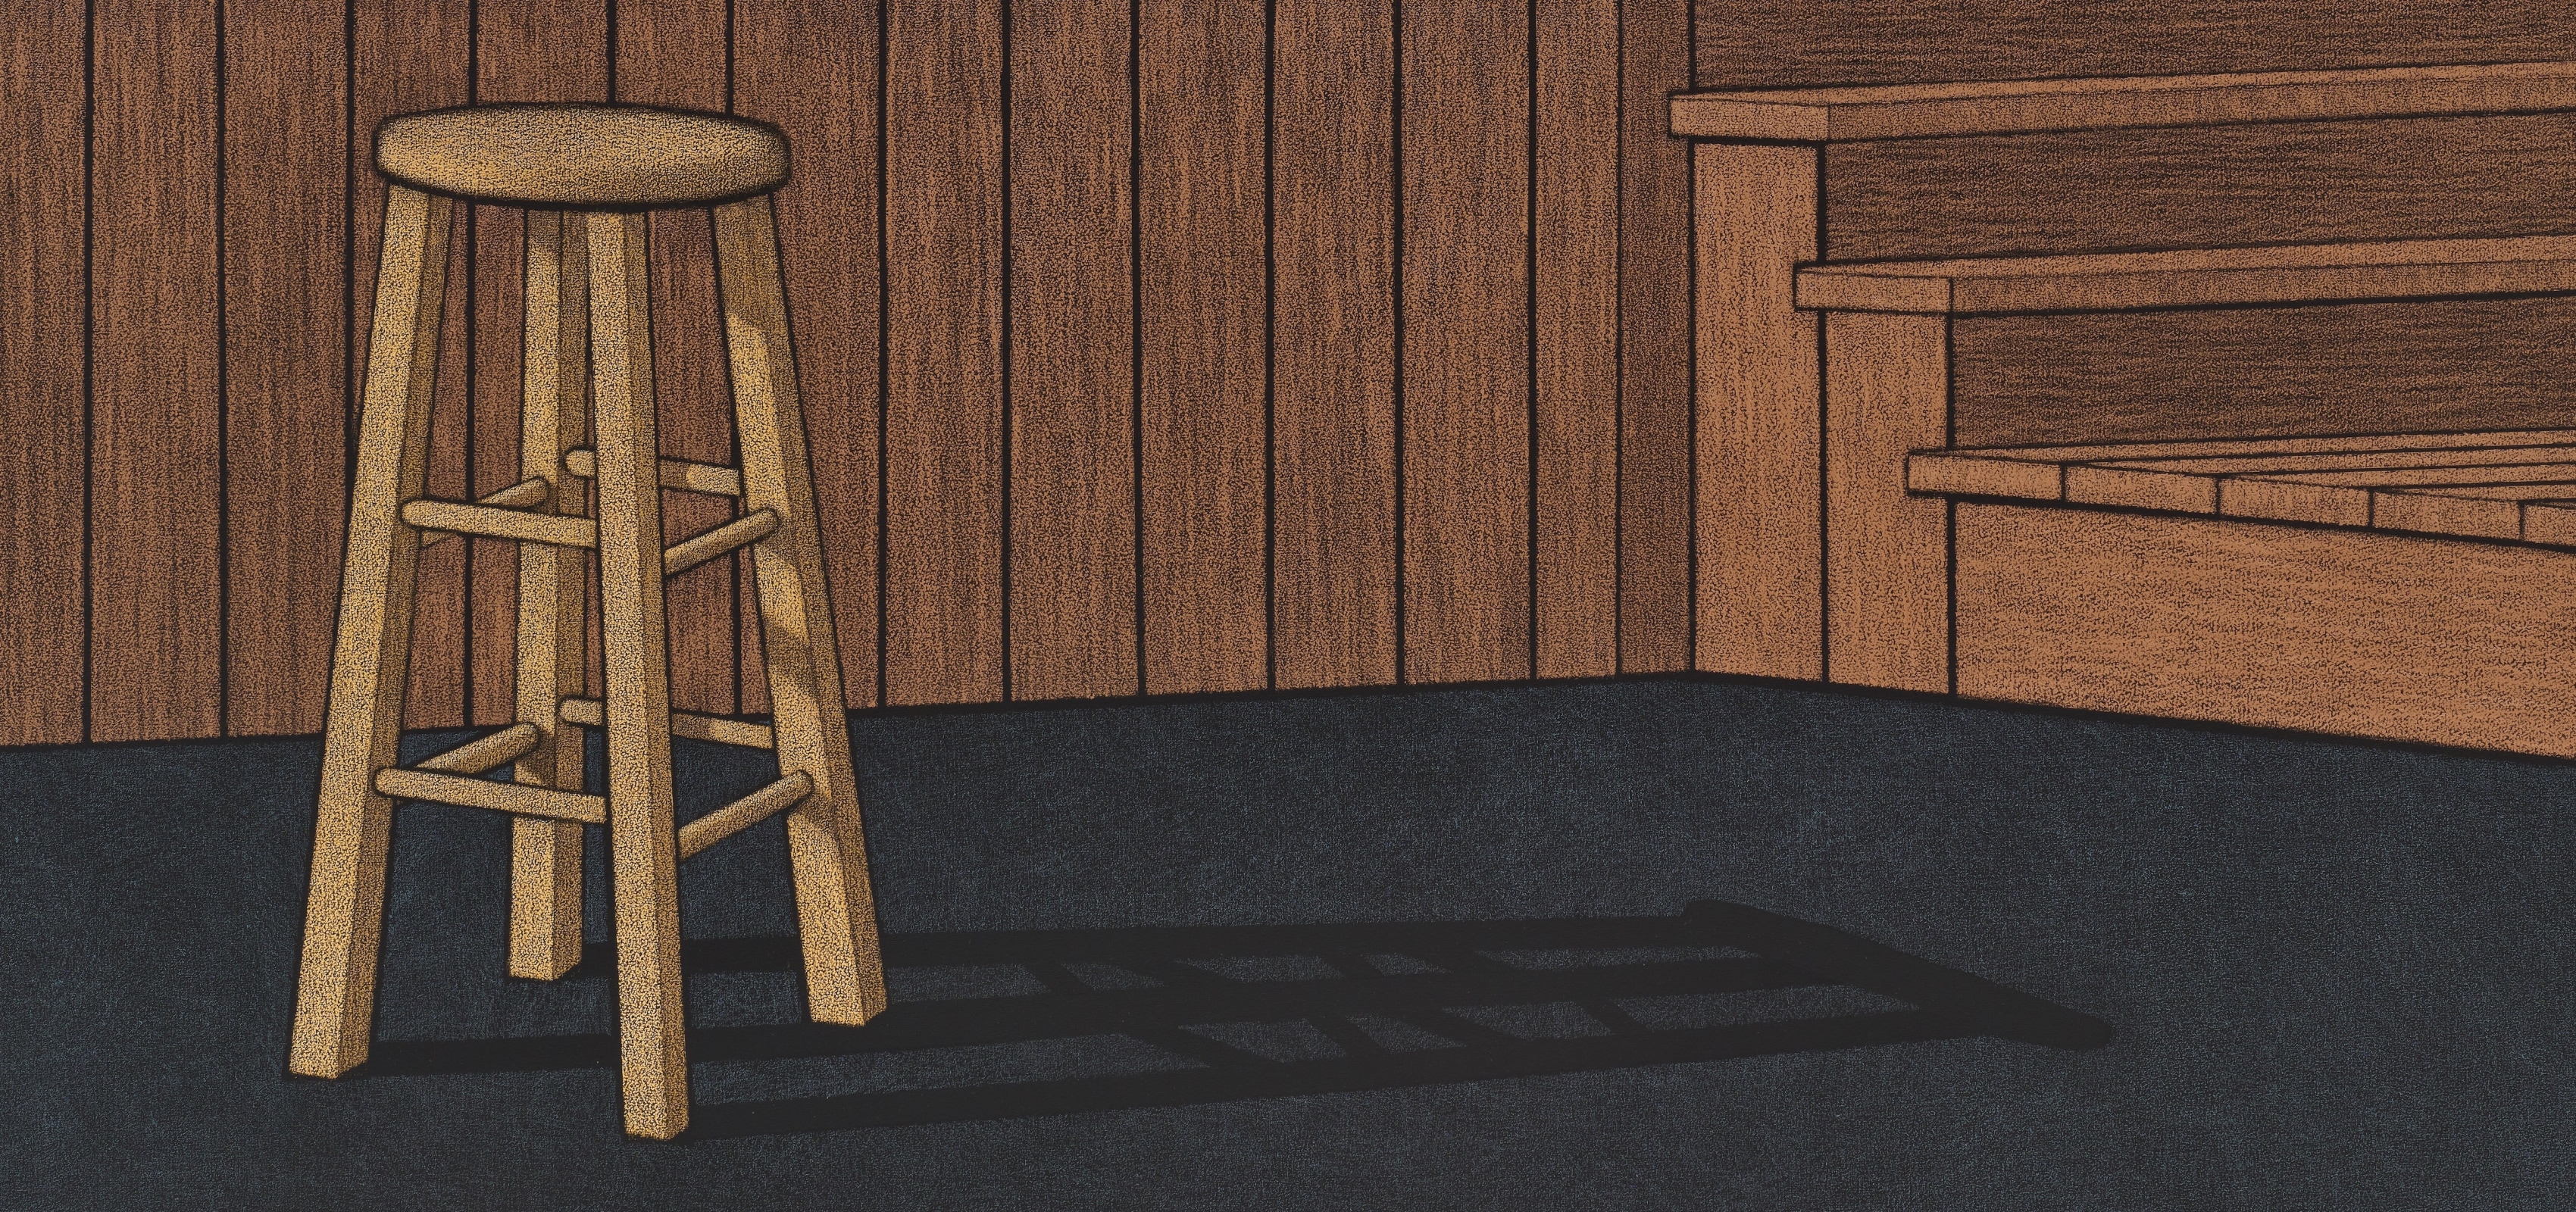 An oil pastel painting of a wooden stool in an empty room with stairs.